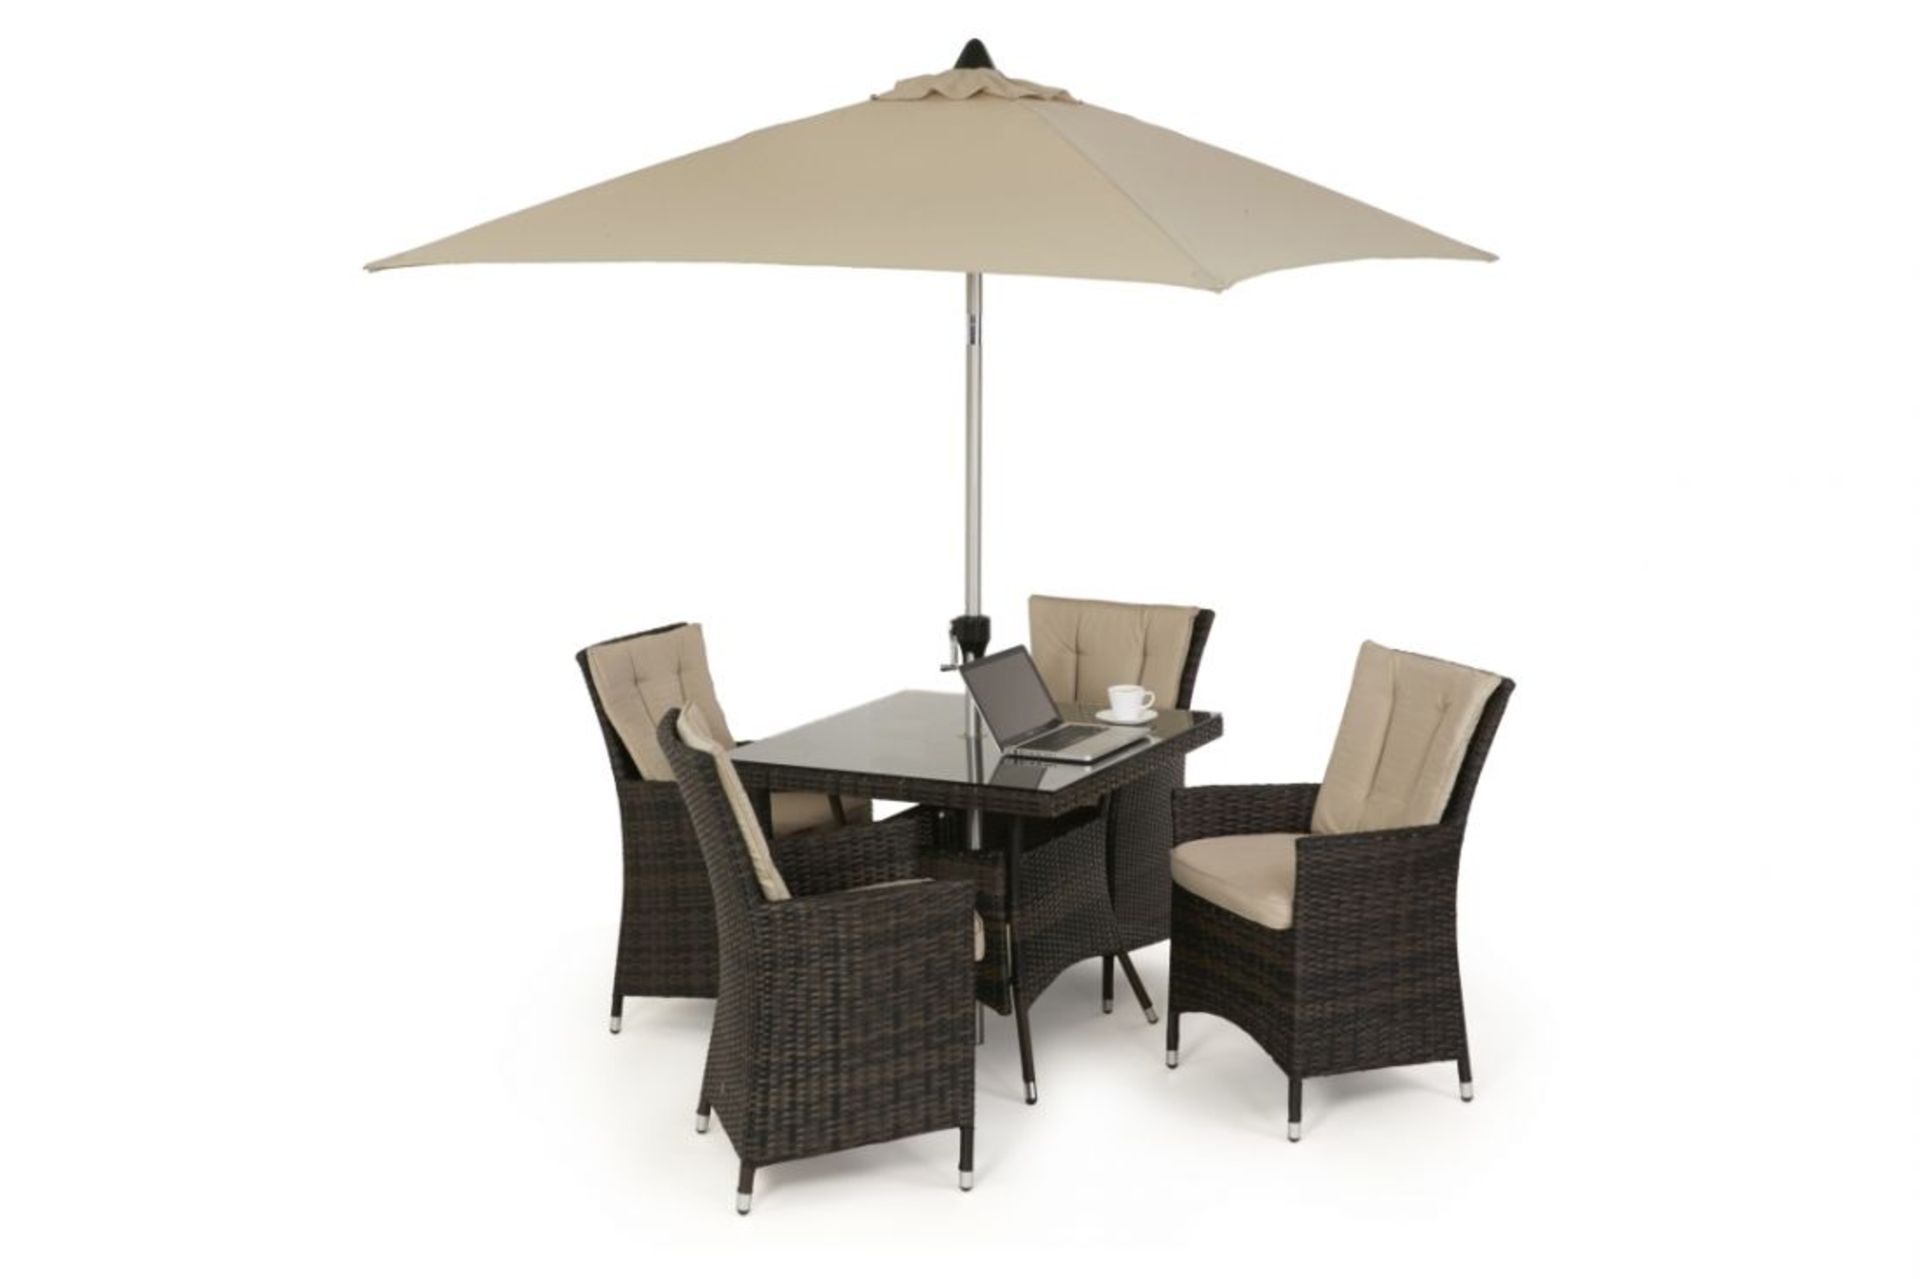 Rattan LA 4 Seat Square Dining Set With Parasol (Brown)*BRAND NEW*